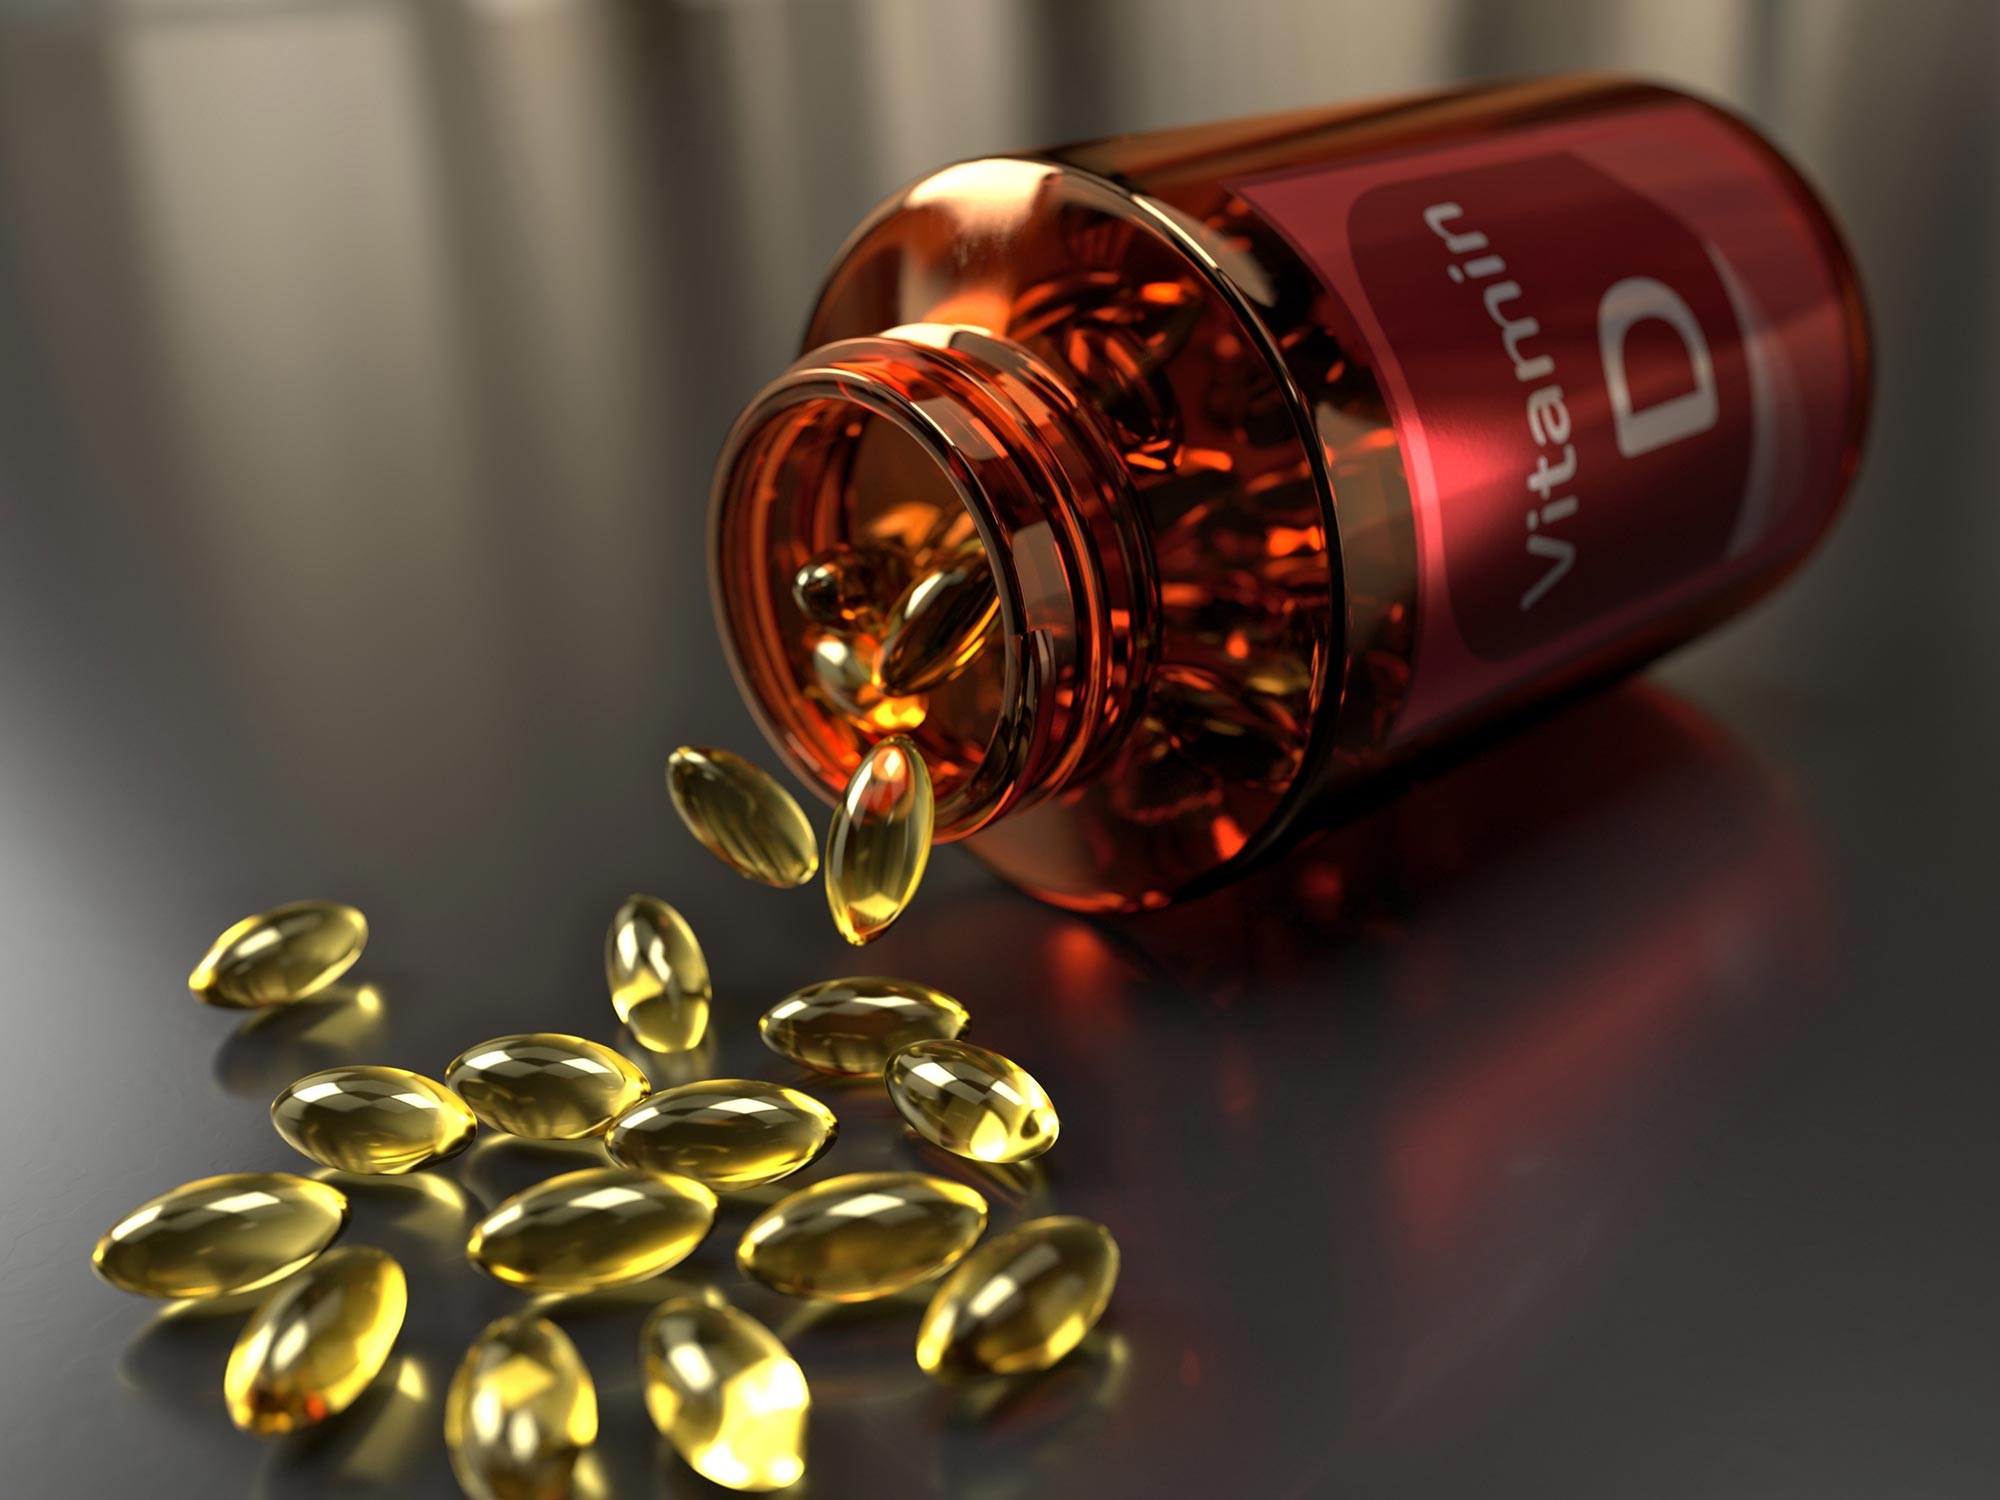 Illustration of a bottle with a vitamin D supplement capsule